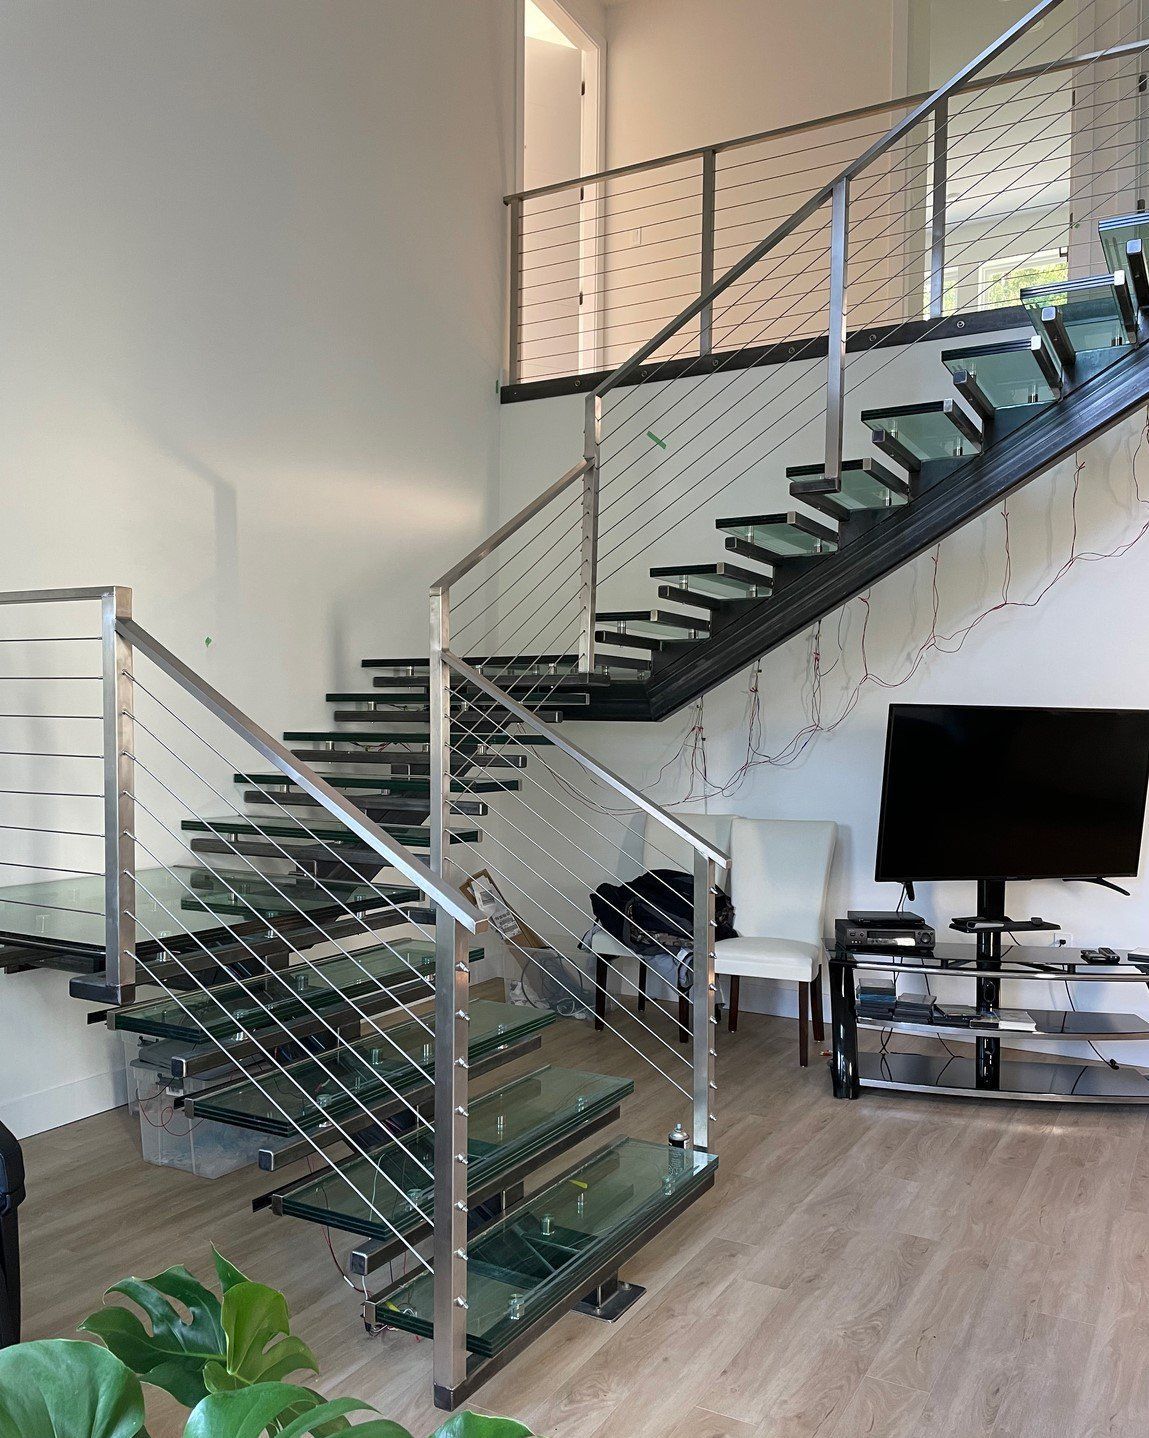 Another mono stringer staircase by Vancouver Fabricators